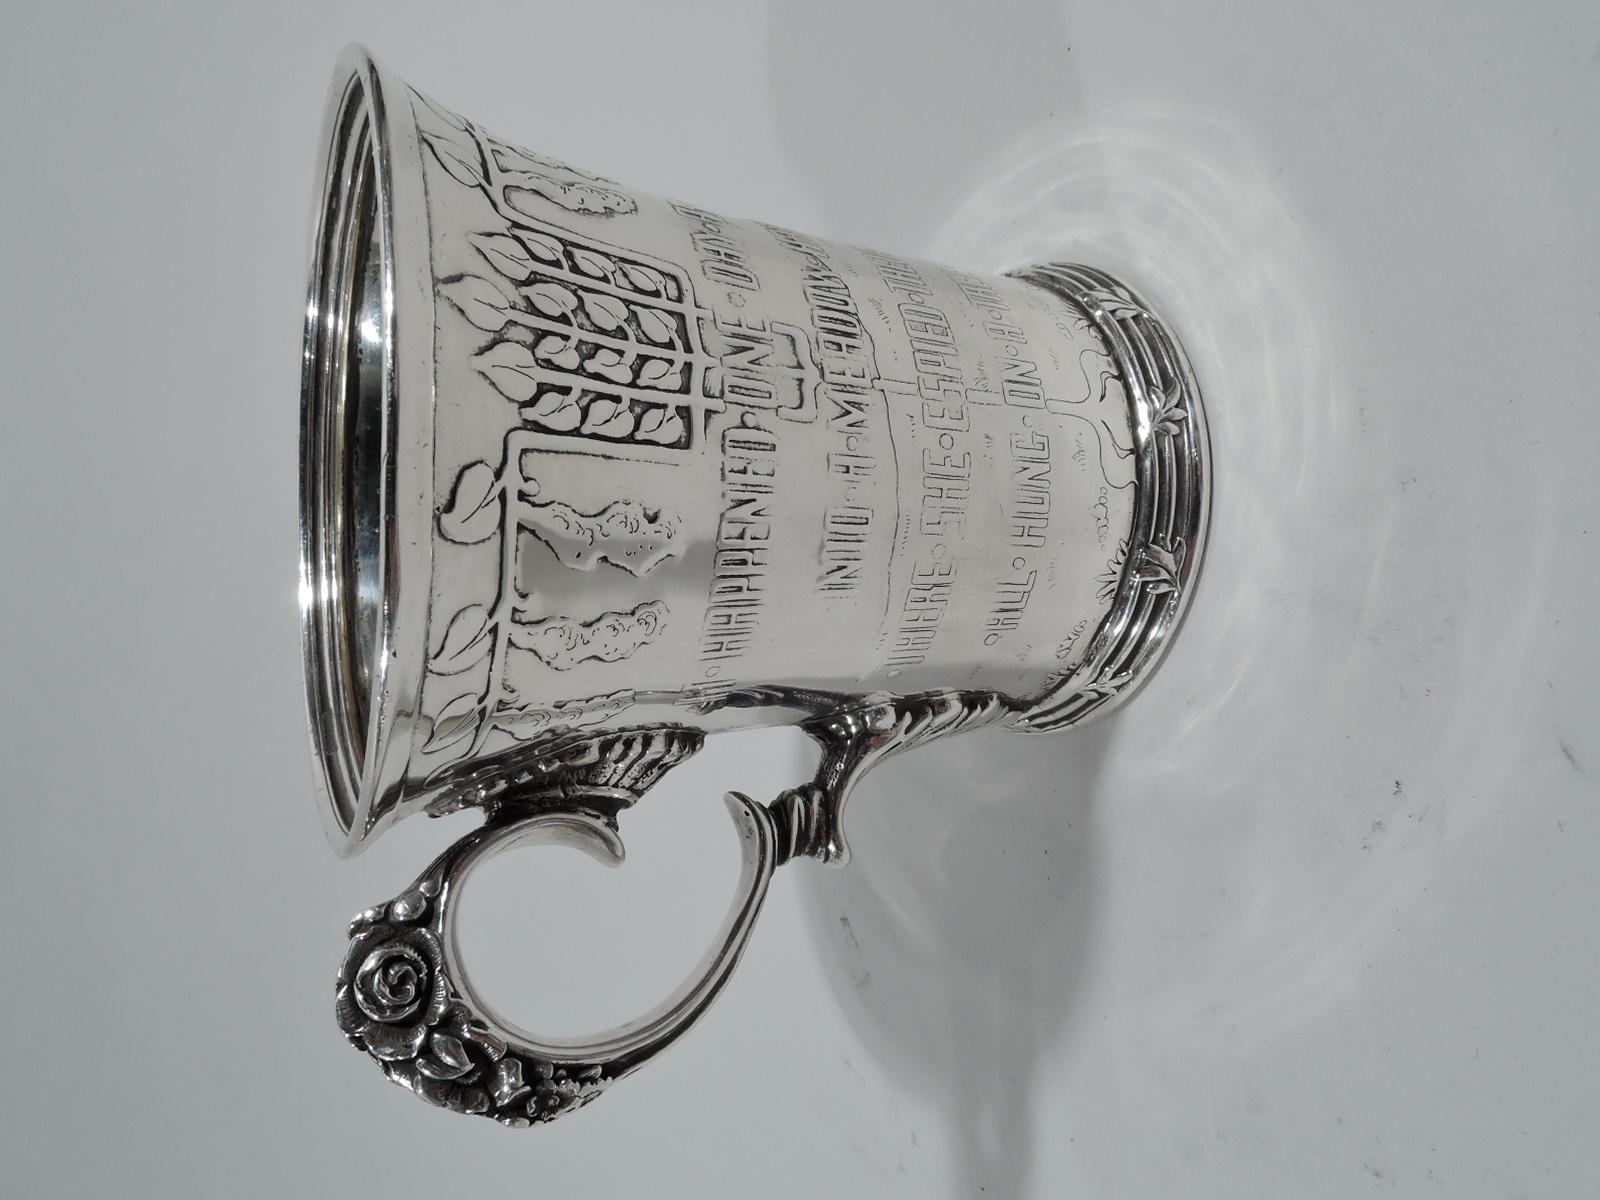 Edwardian Art Nouveau sterling silver baby cup. Made by Tiffany & Co. in New York, and imported to England in 1902 by Albert William Feavearyear in London. Tall bowl with flared rim, reeded base, and flower-capped scroll handle with leaf mounts.